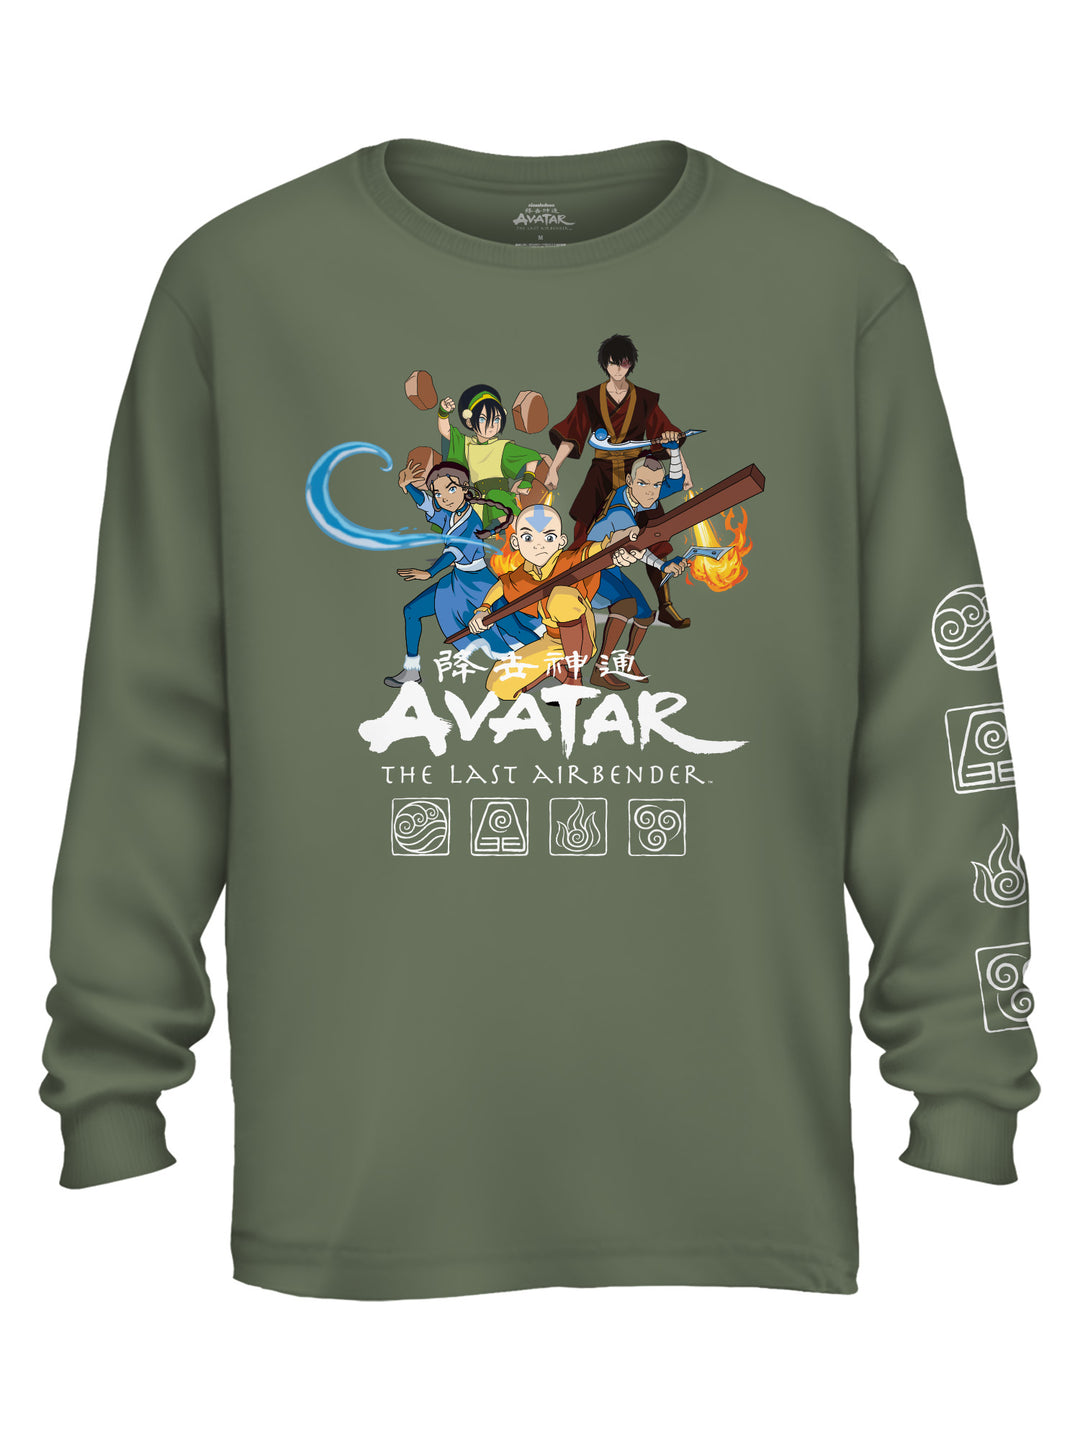 Avatar The Last Airbender Group Ready Nickelodeon Adult Long Sleeve T-Shirt